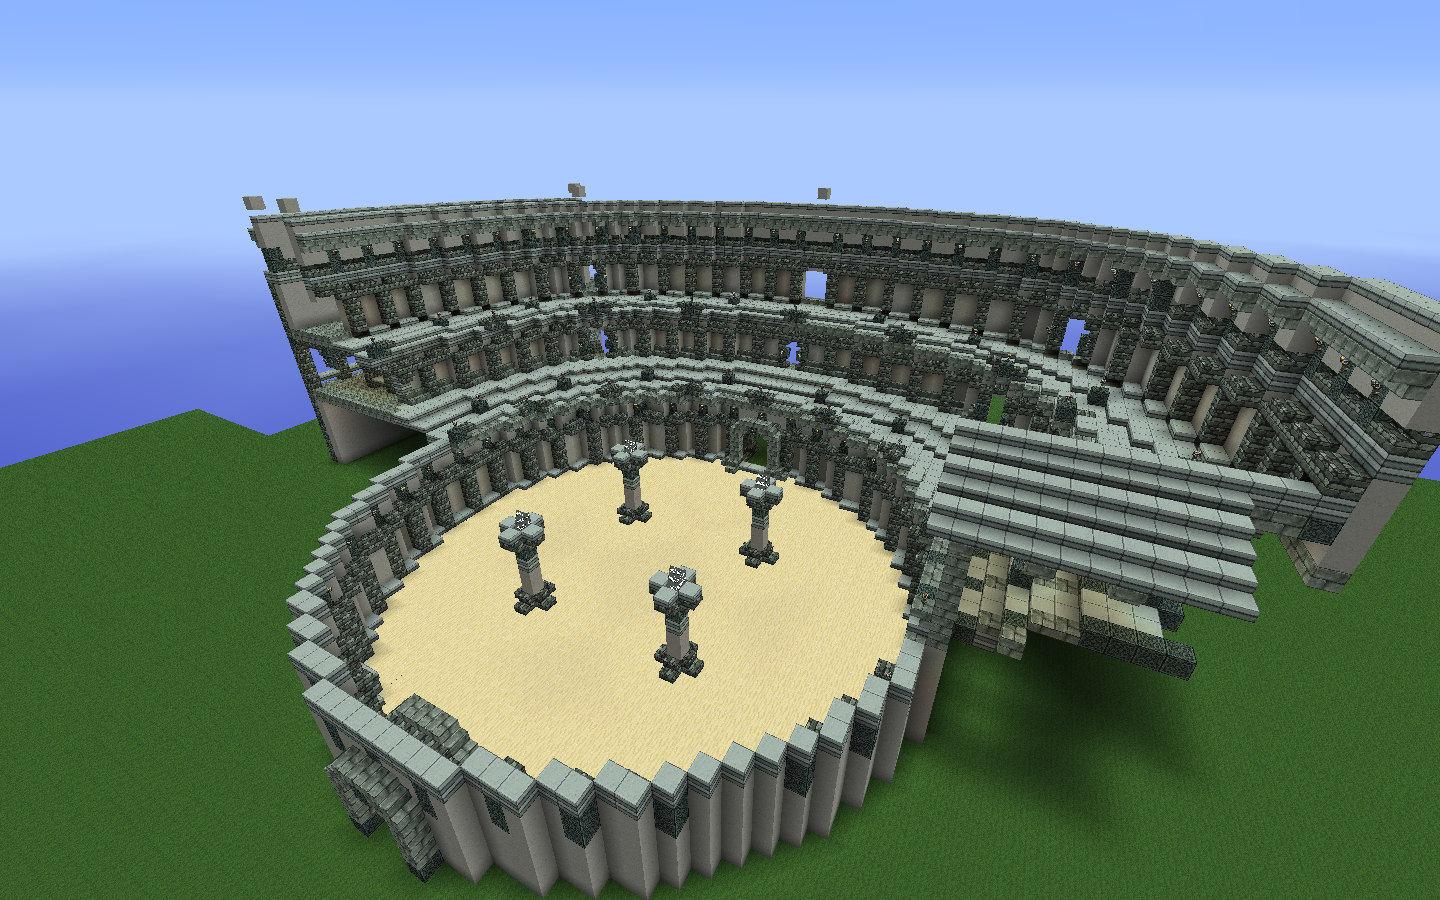 MinecraftEdu has pre-created landmarks and structures that teachers can imp...